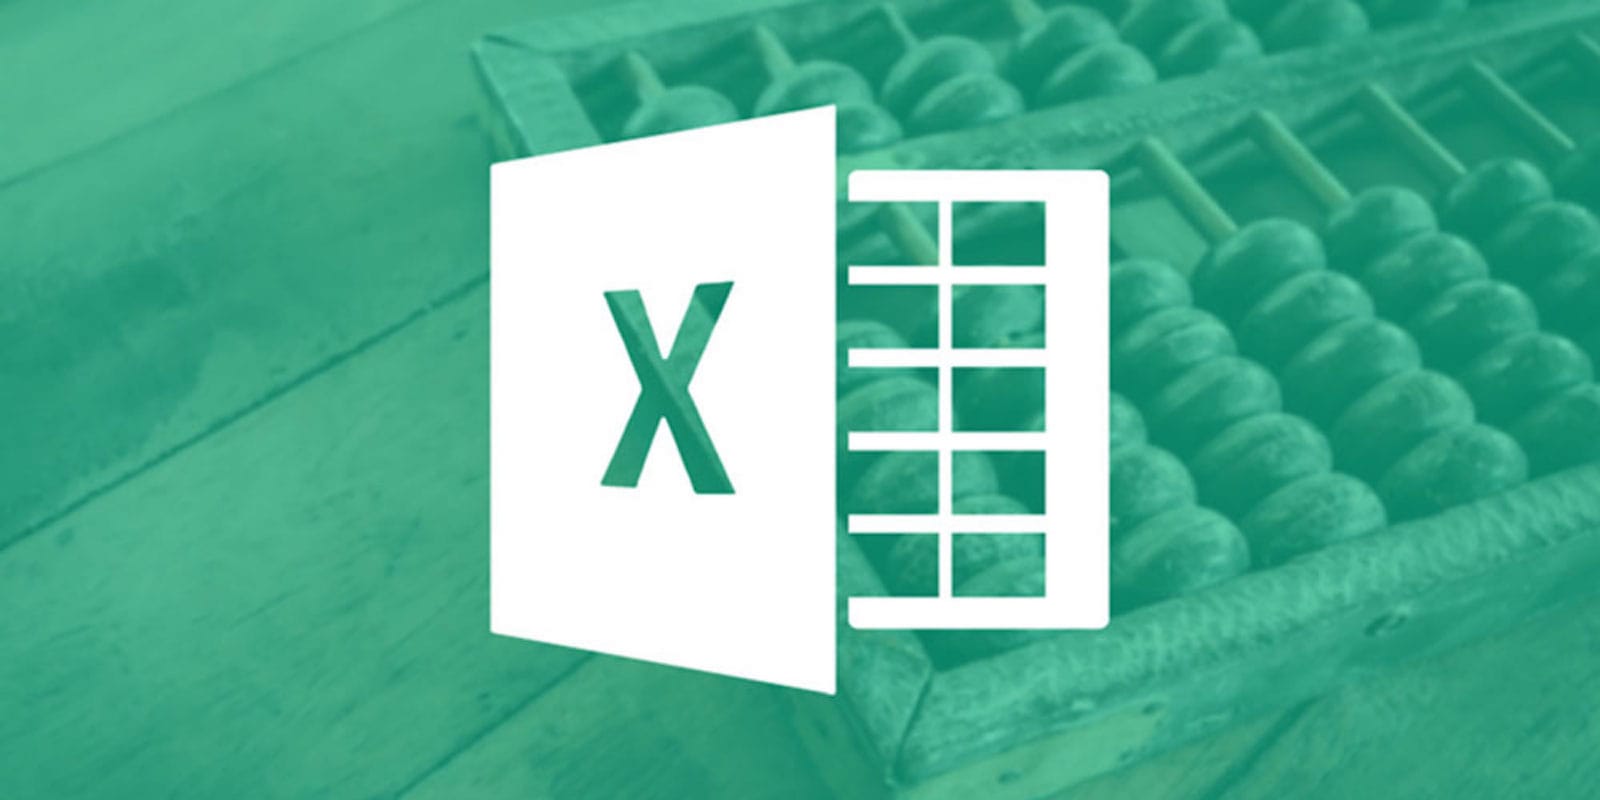 Master the dark arts of Excel spreadsheets with this packed lesson bundle.